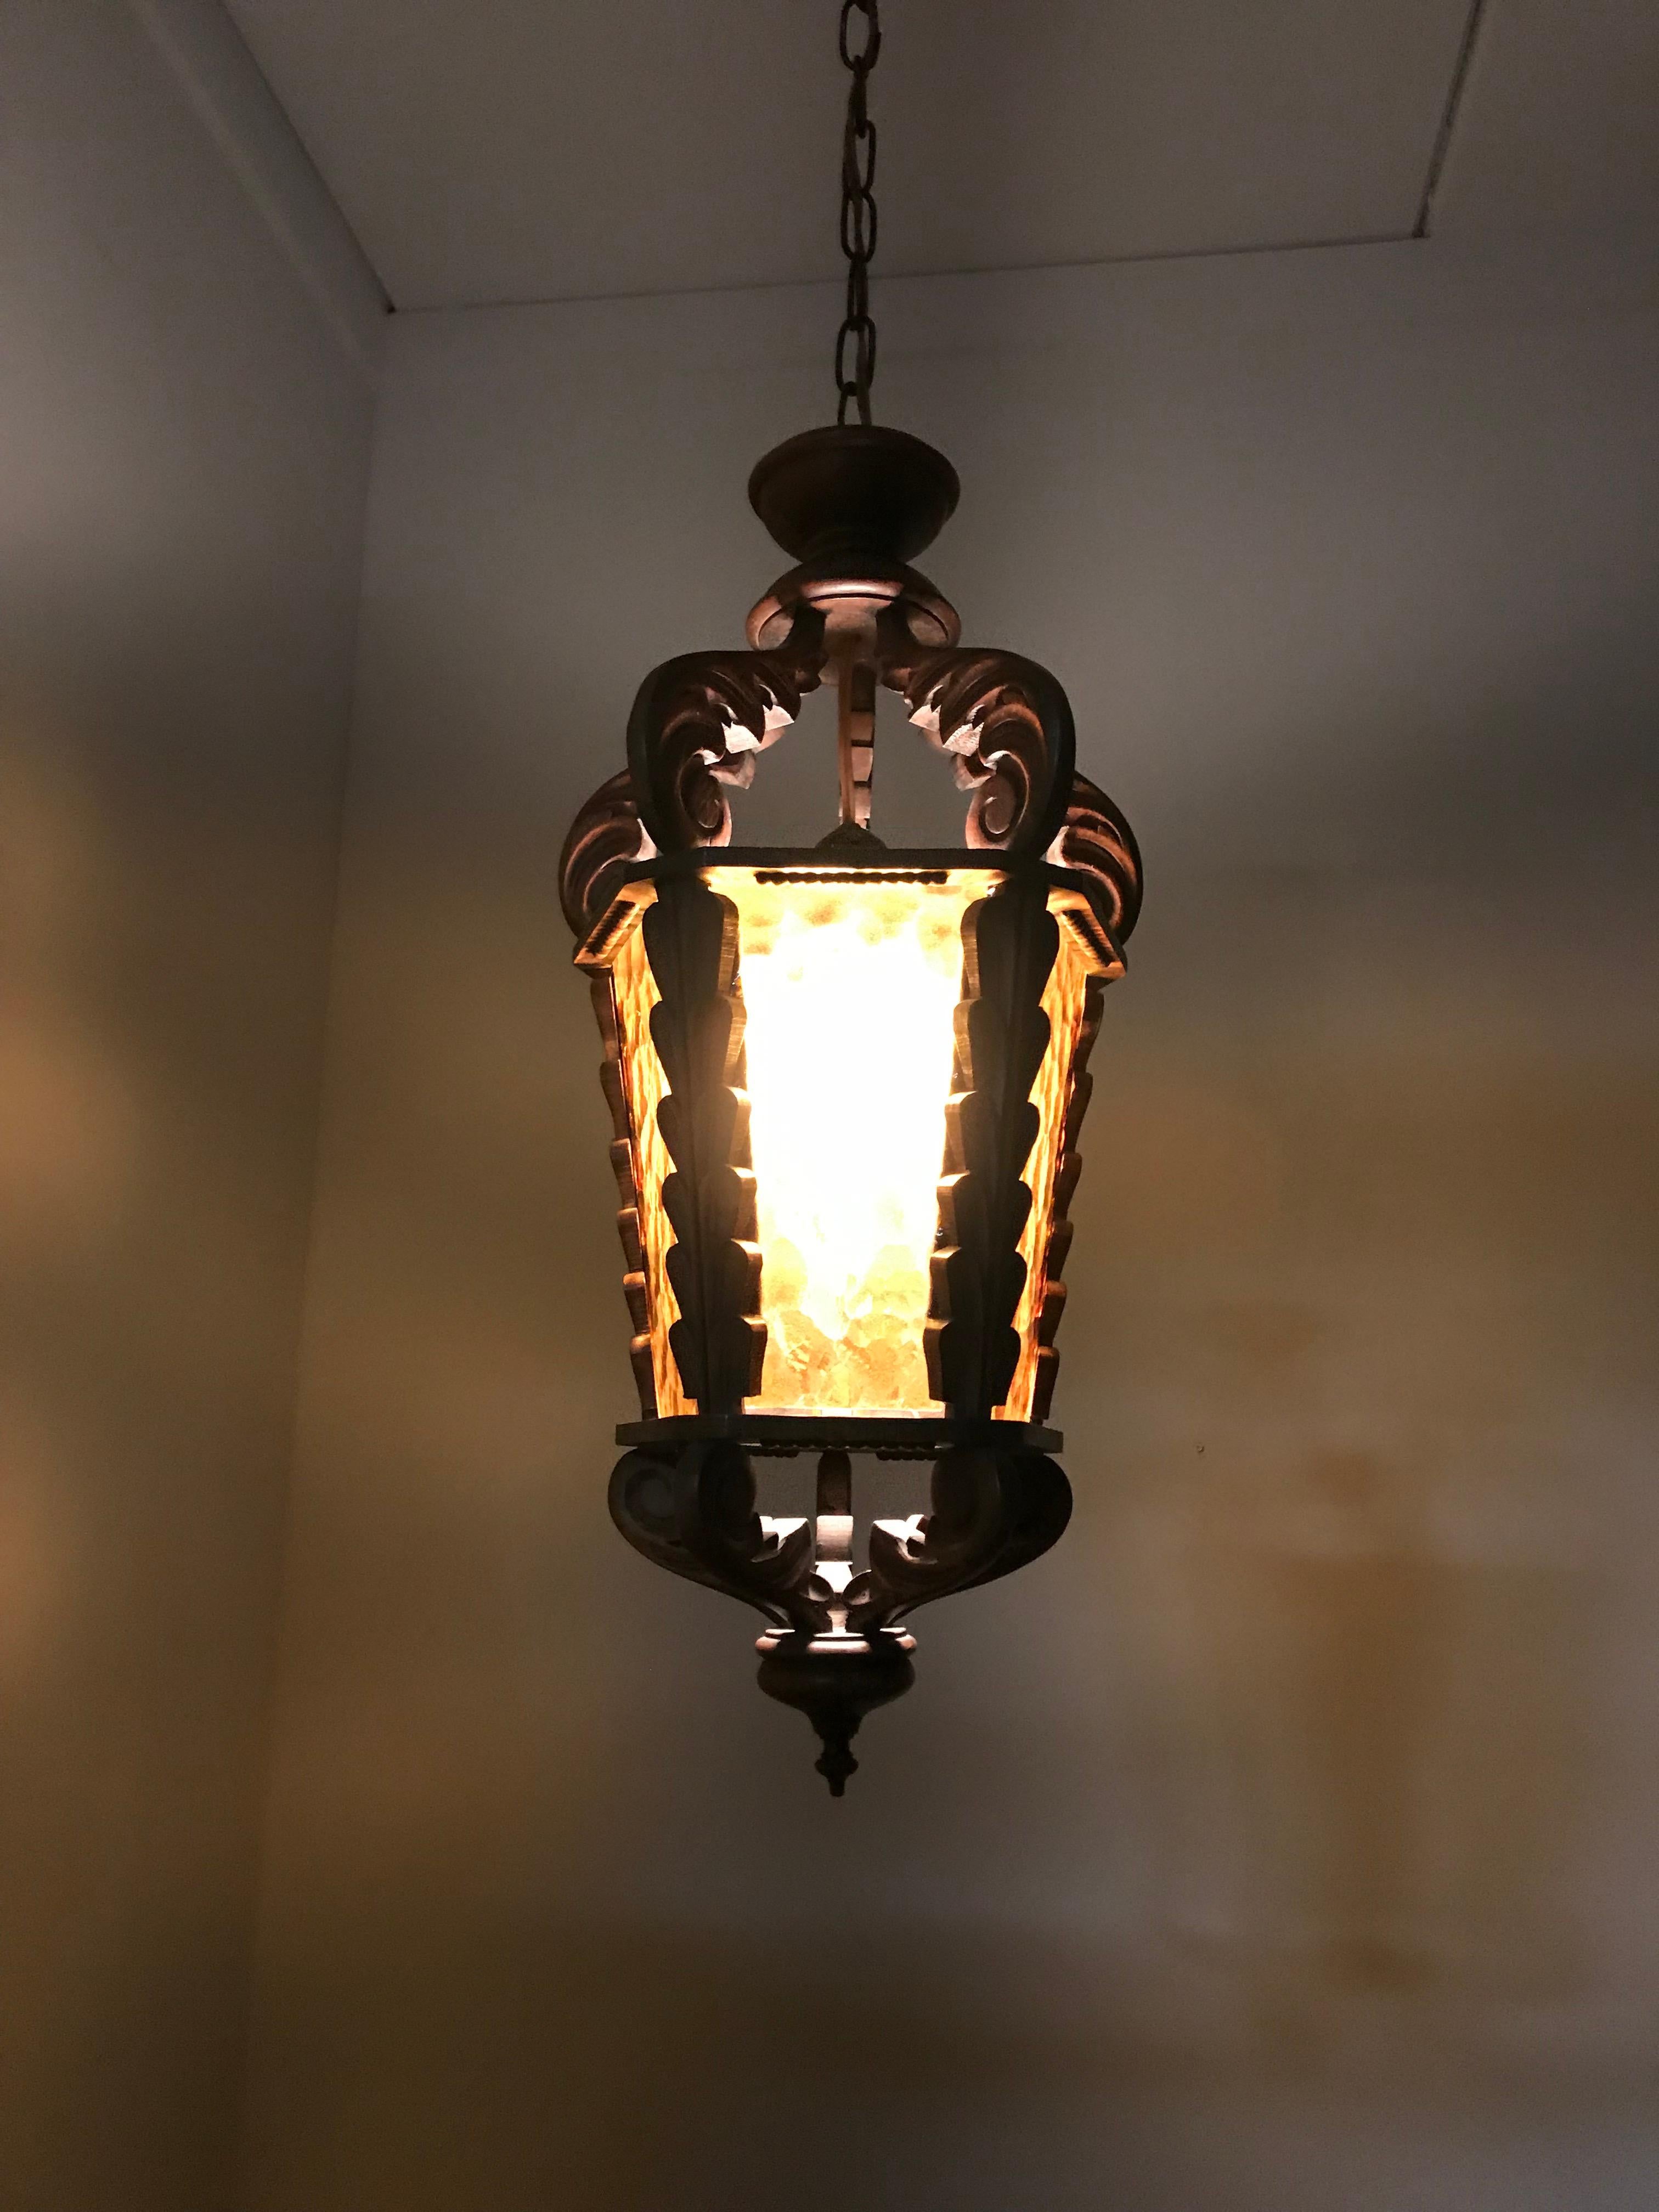 Hand-Crafted Large Midcentury Wooden Pendant / Light Fixture with Rare Amber Cathedral Glass For Sale